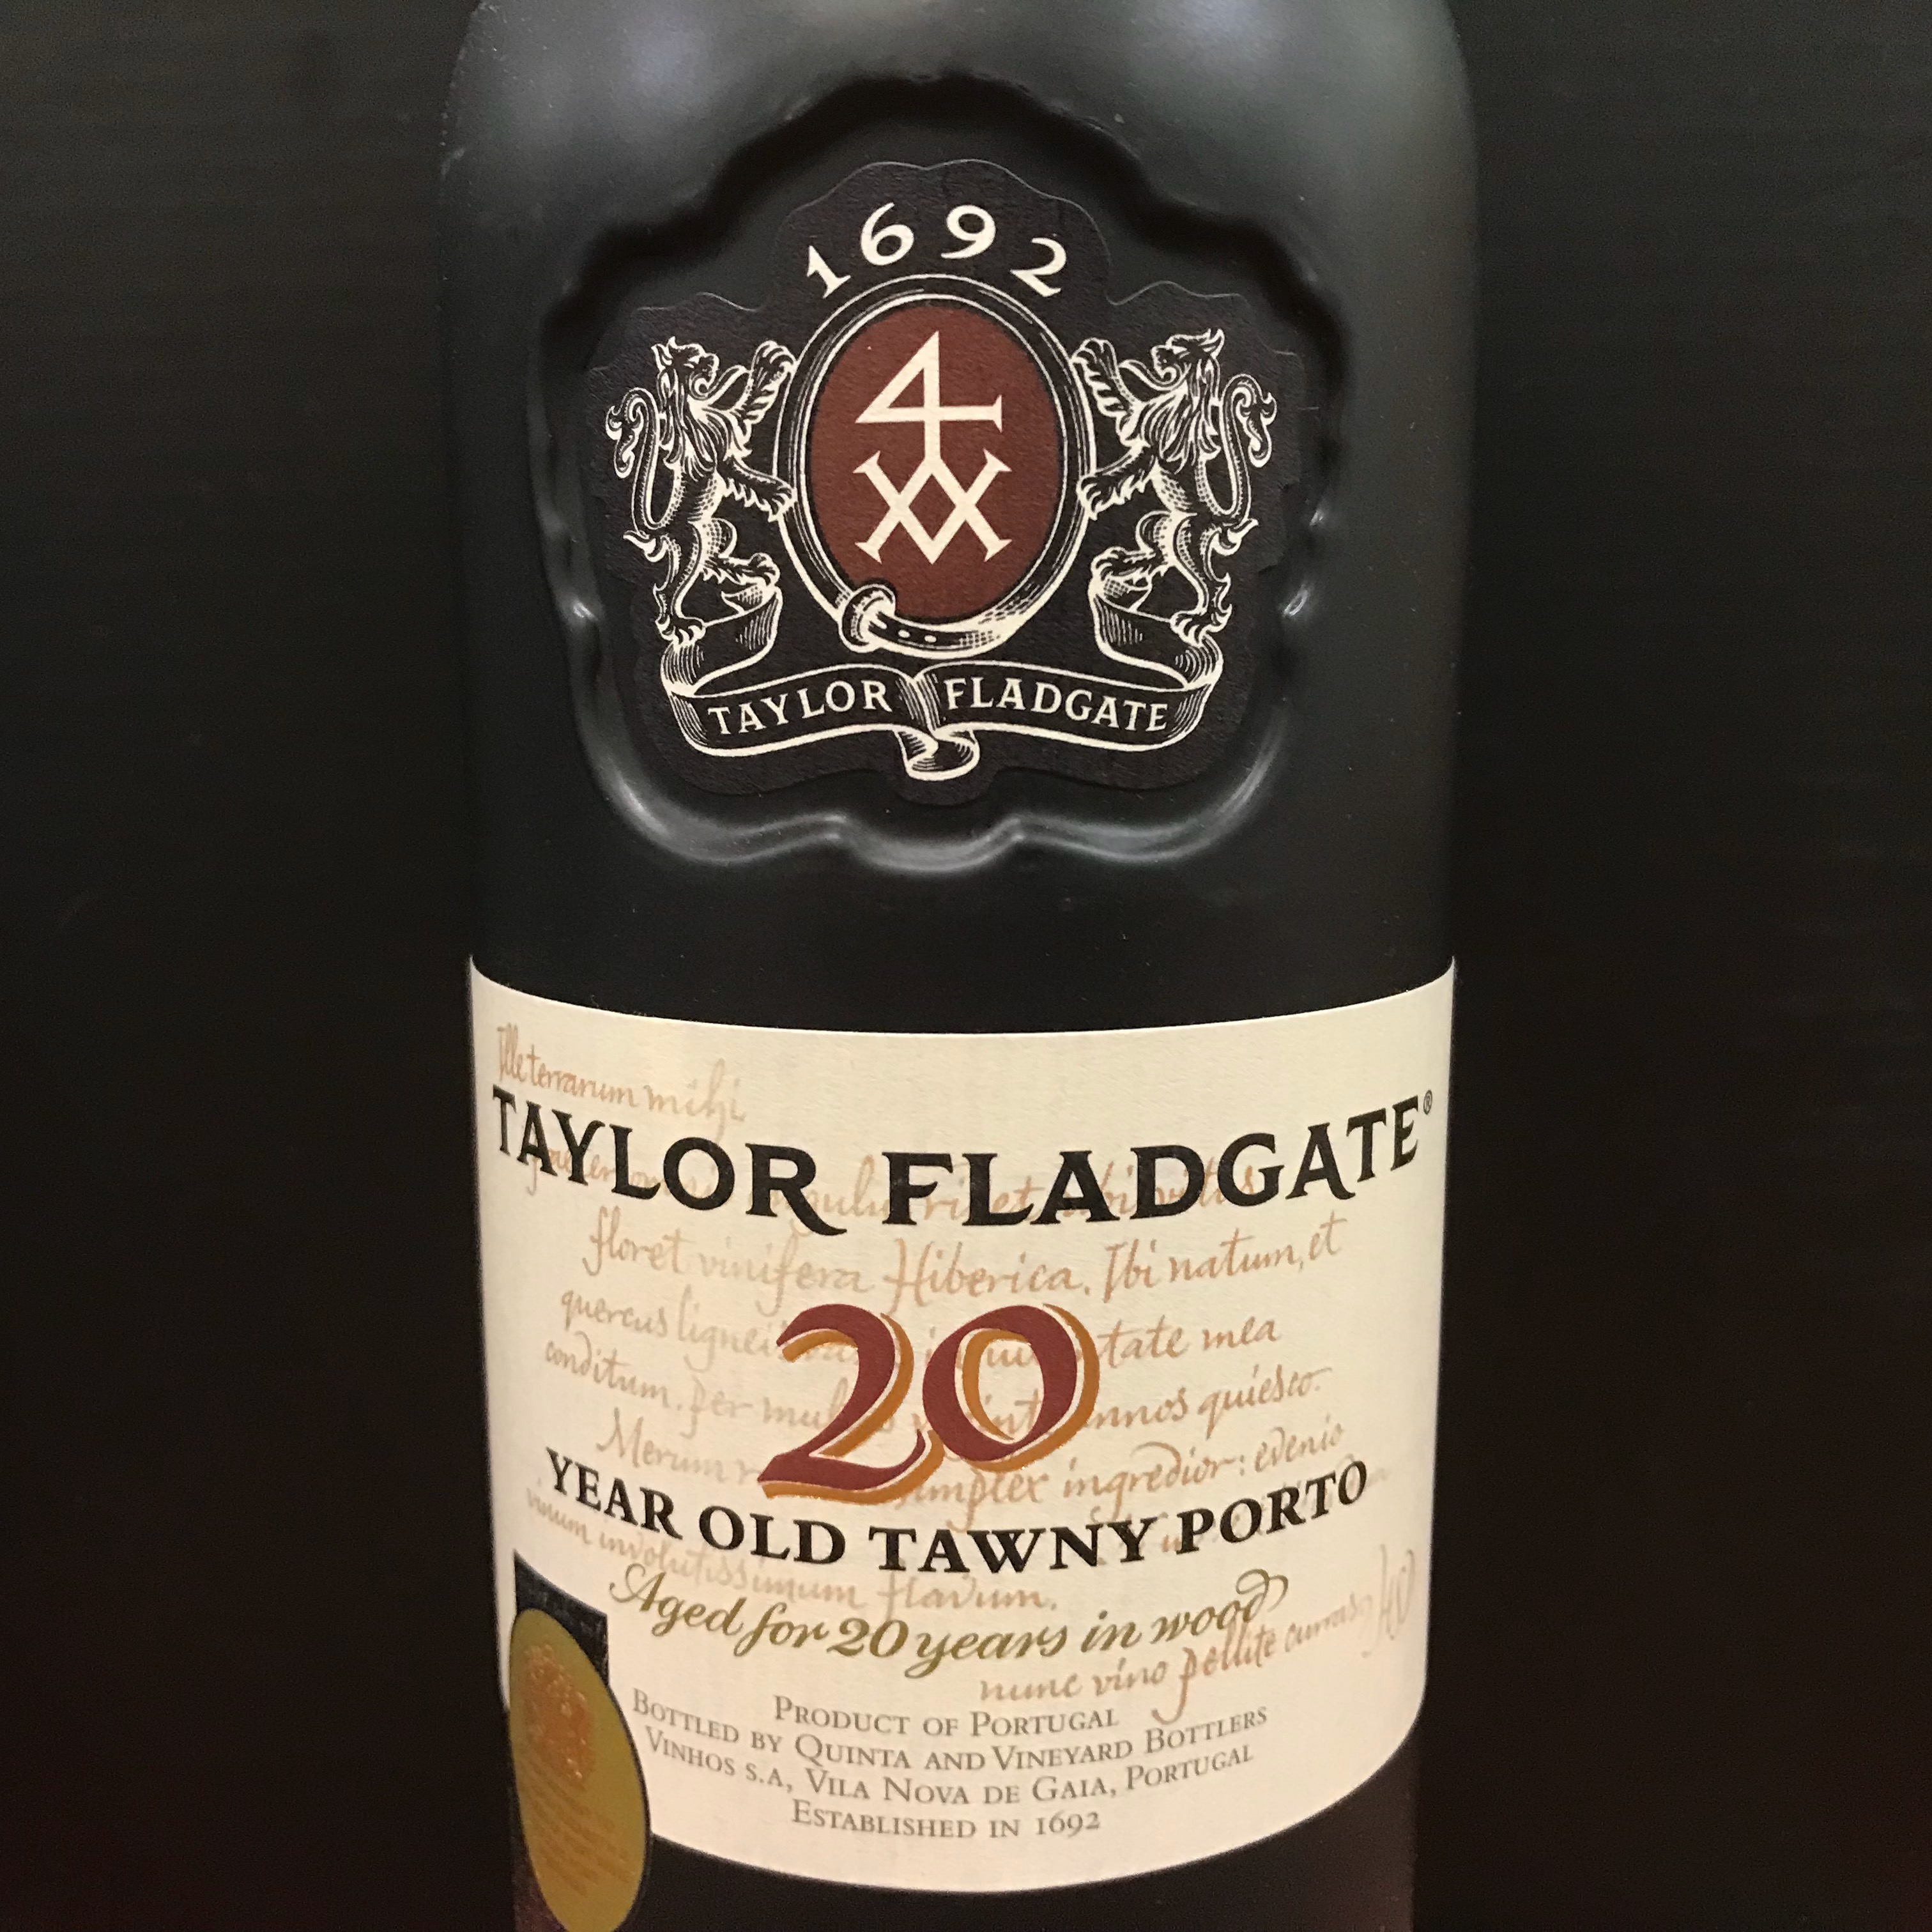 Taylor Fladgate 20 year old Tawny Port